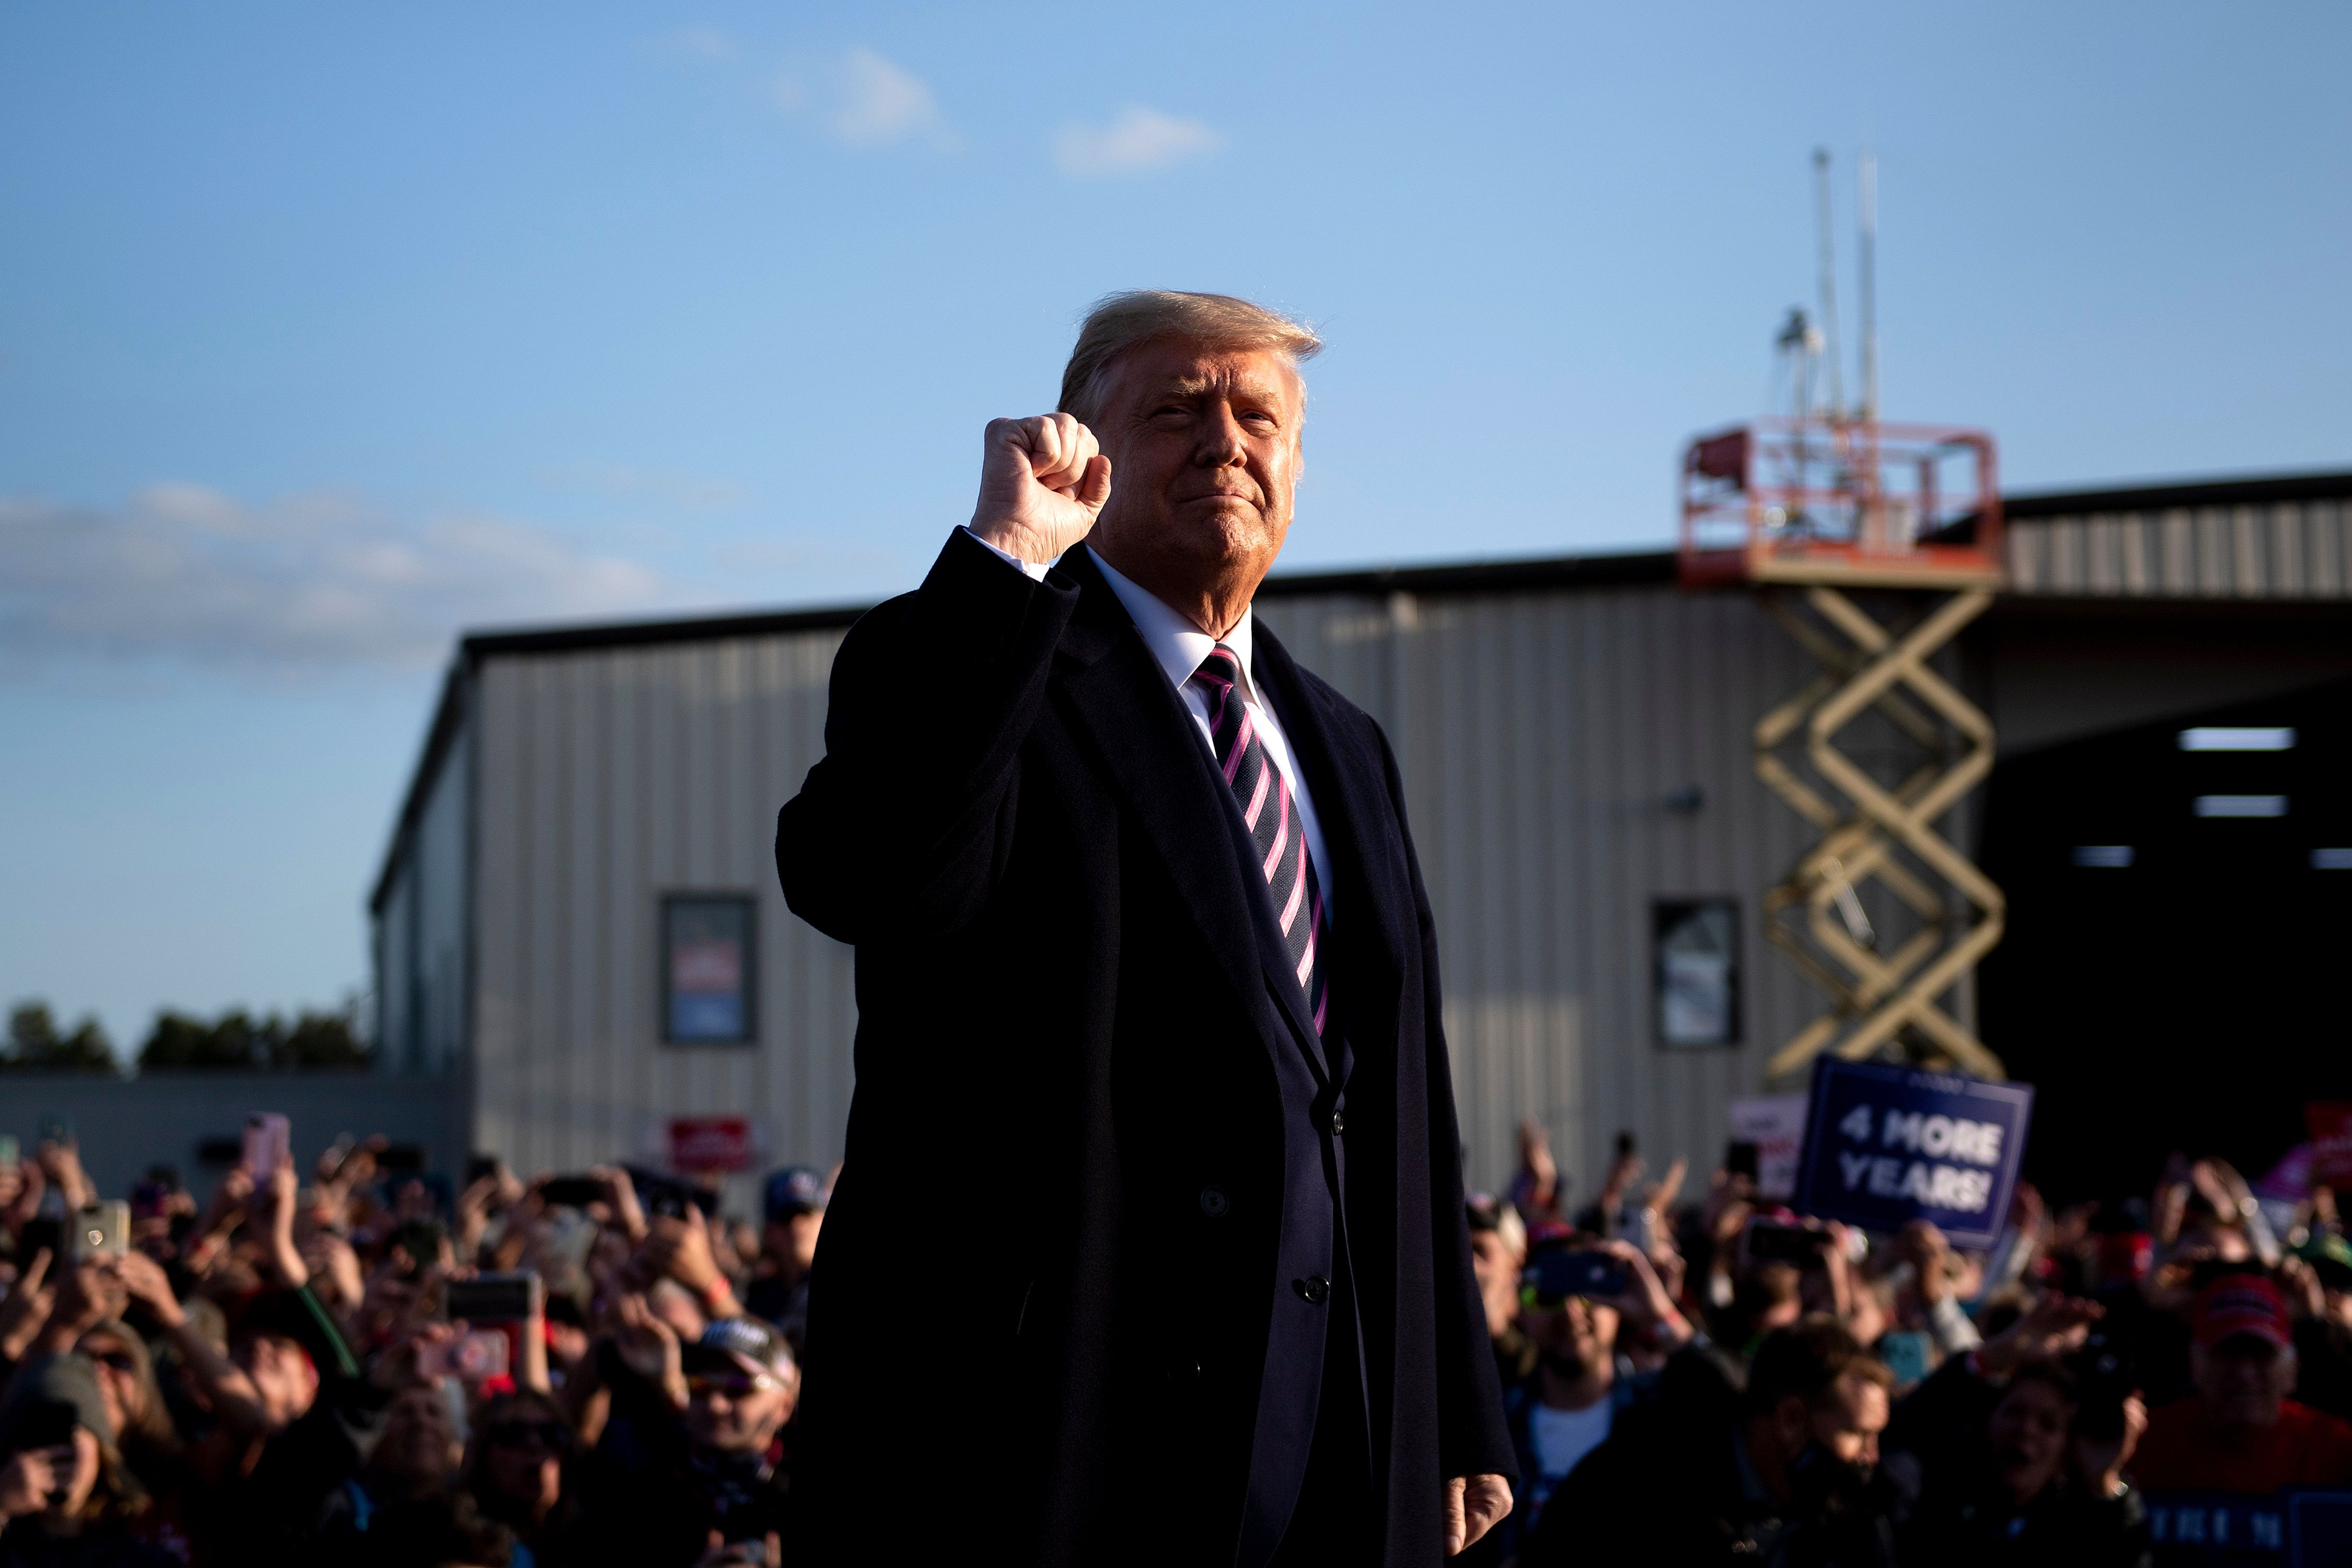 Trump, in a red, white, and blue striped tie and back winter coat, smiles slightly, lit by the setting sun. He raises his right fist; behind him, a large crowd cheers, many holding Trump 2020 signs.